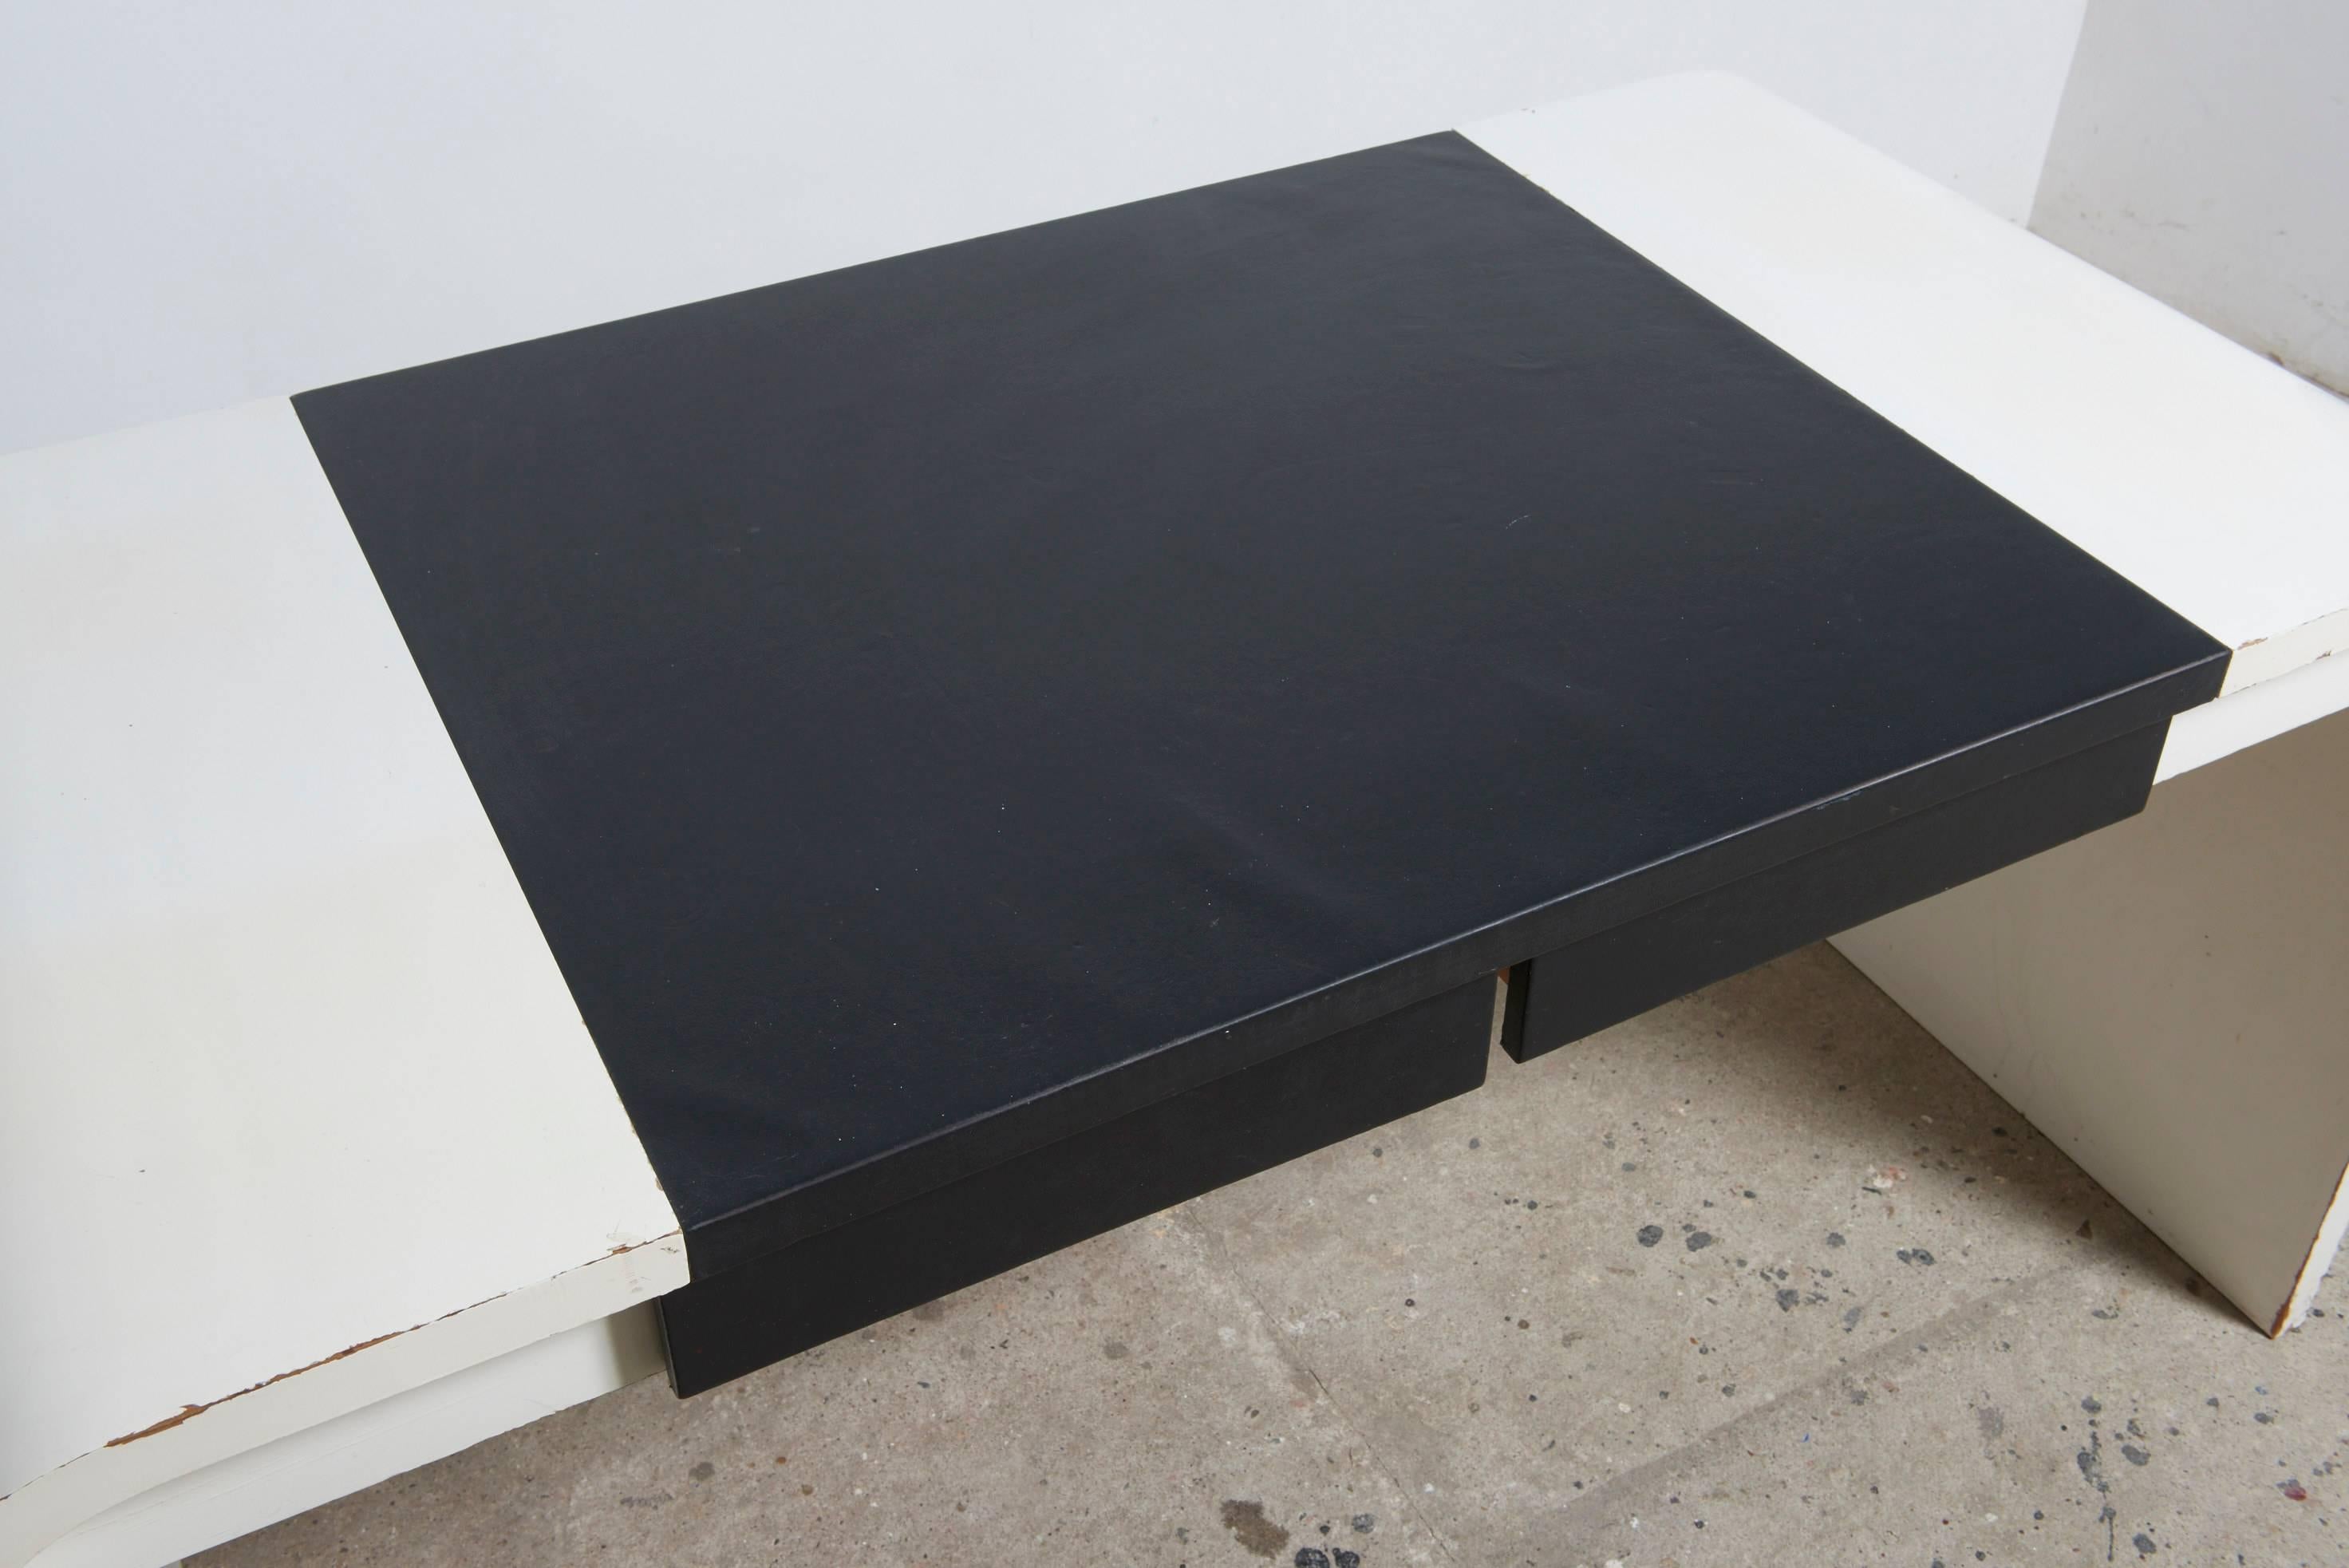 Lacquered Black and White 1960s Desk Designed by the Coene